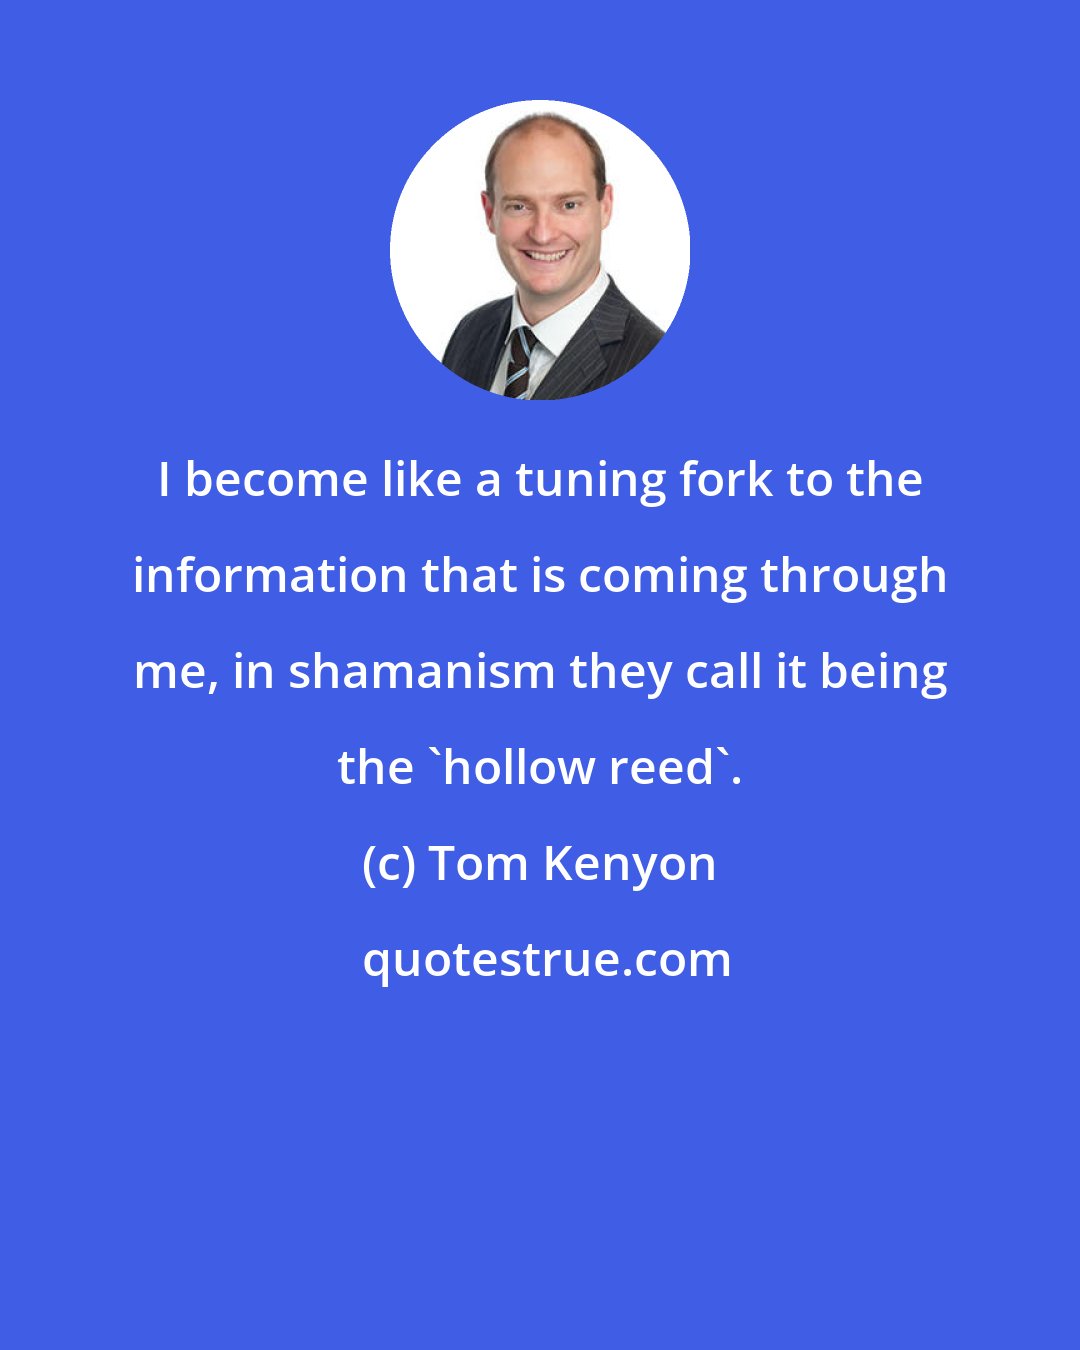 Tom Kenyon: I become like a tuning fork to the information that is coming through me, in shamanism they call it being the 'hollow reed'.